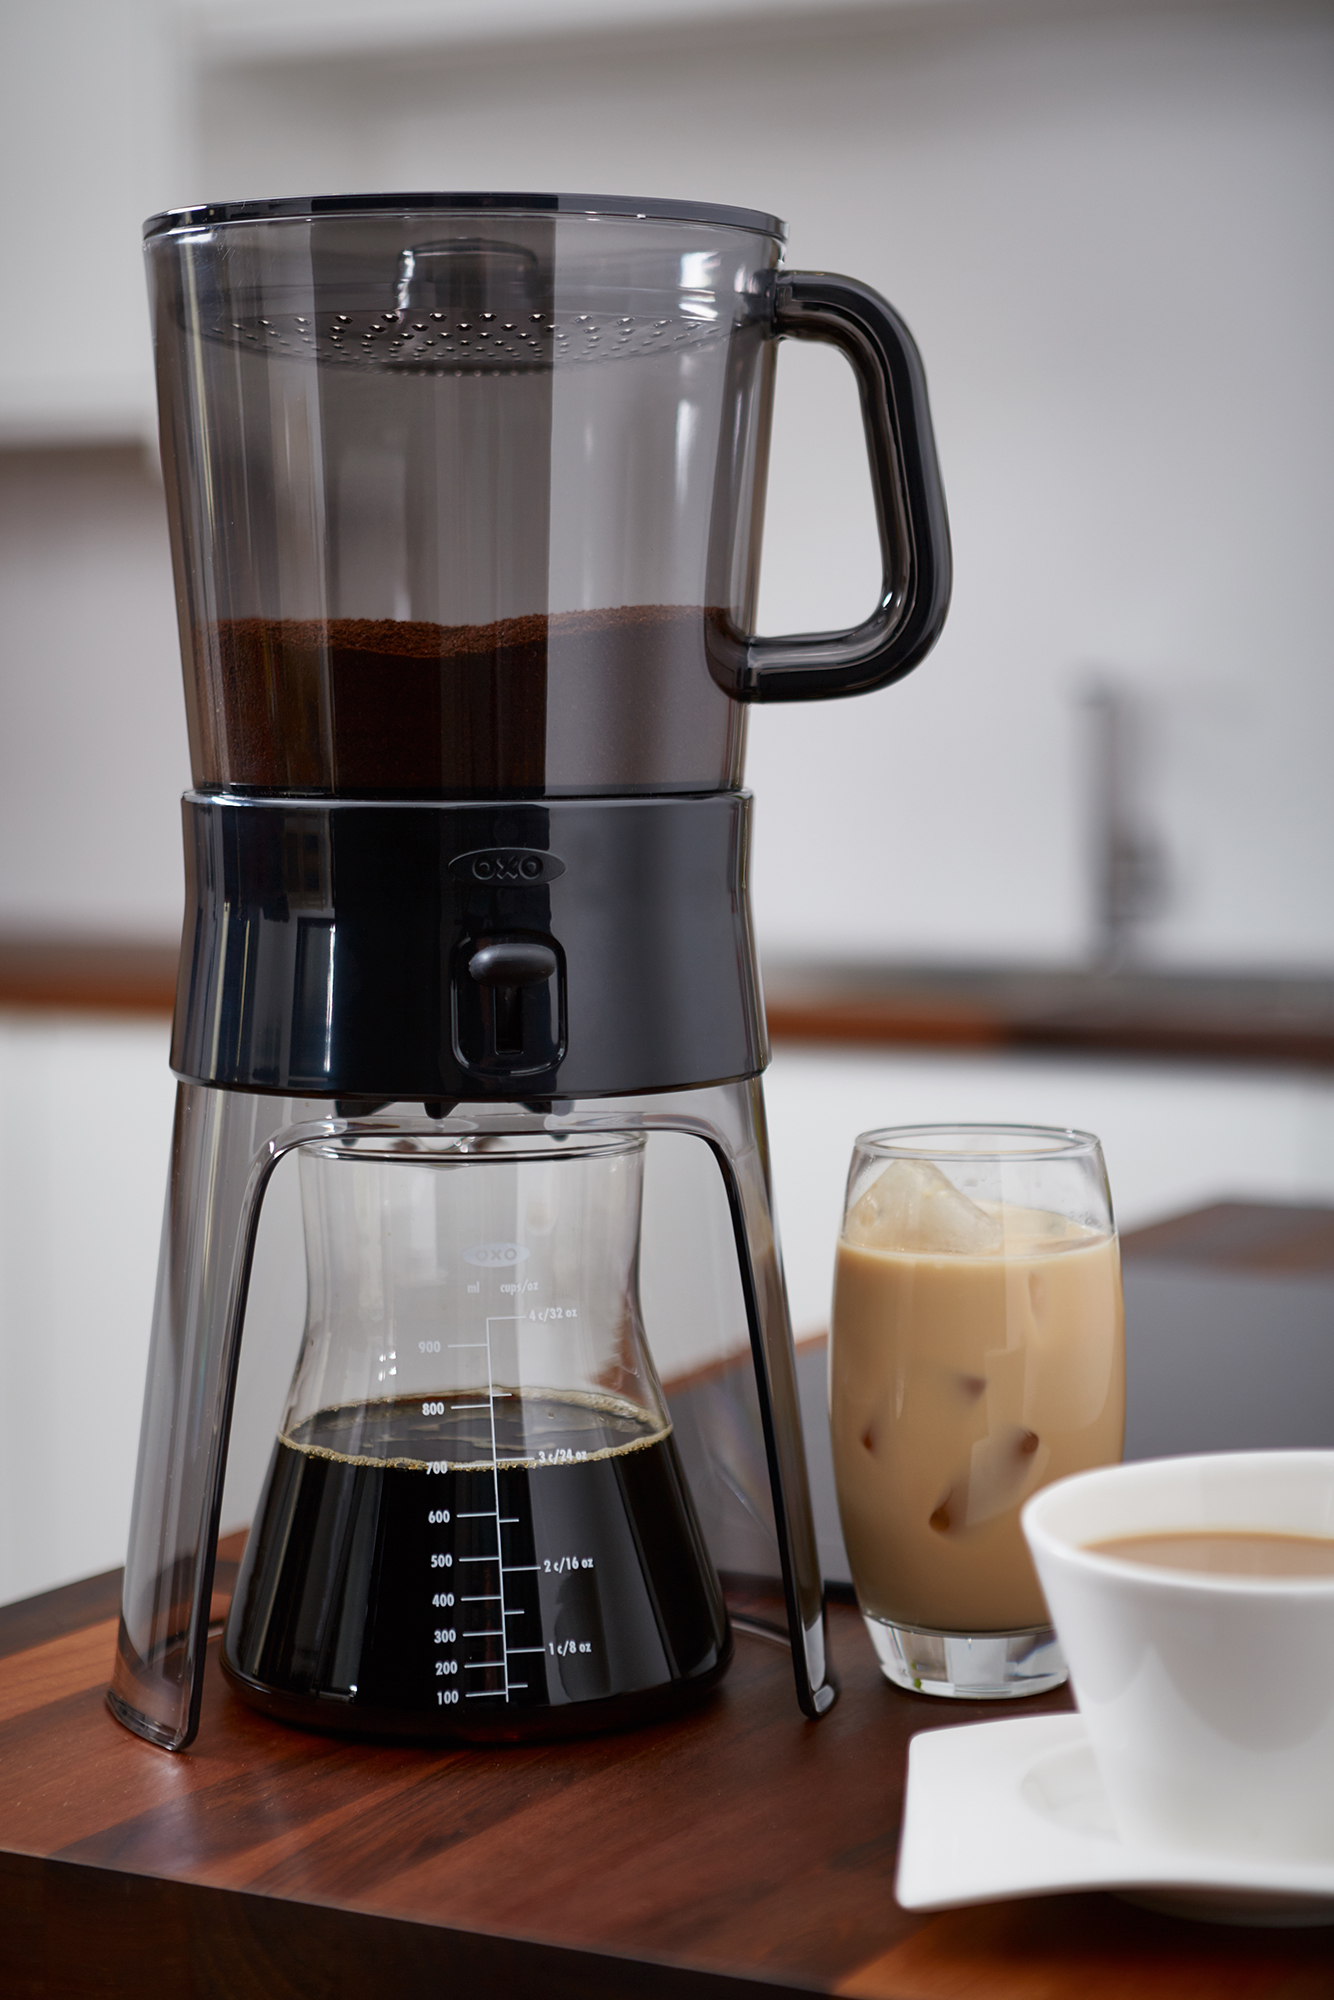 OXO Cold Brew Coffee Maker: Convenient, but not perfect